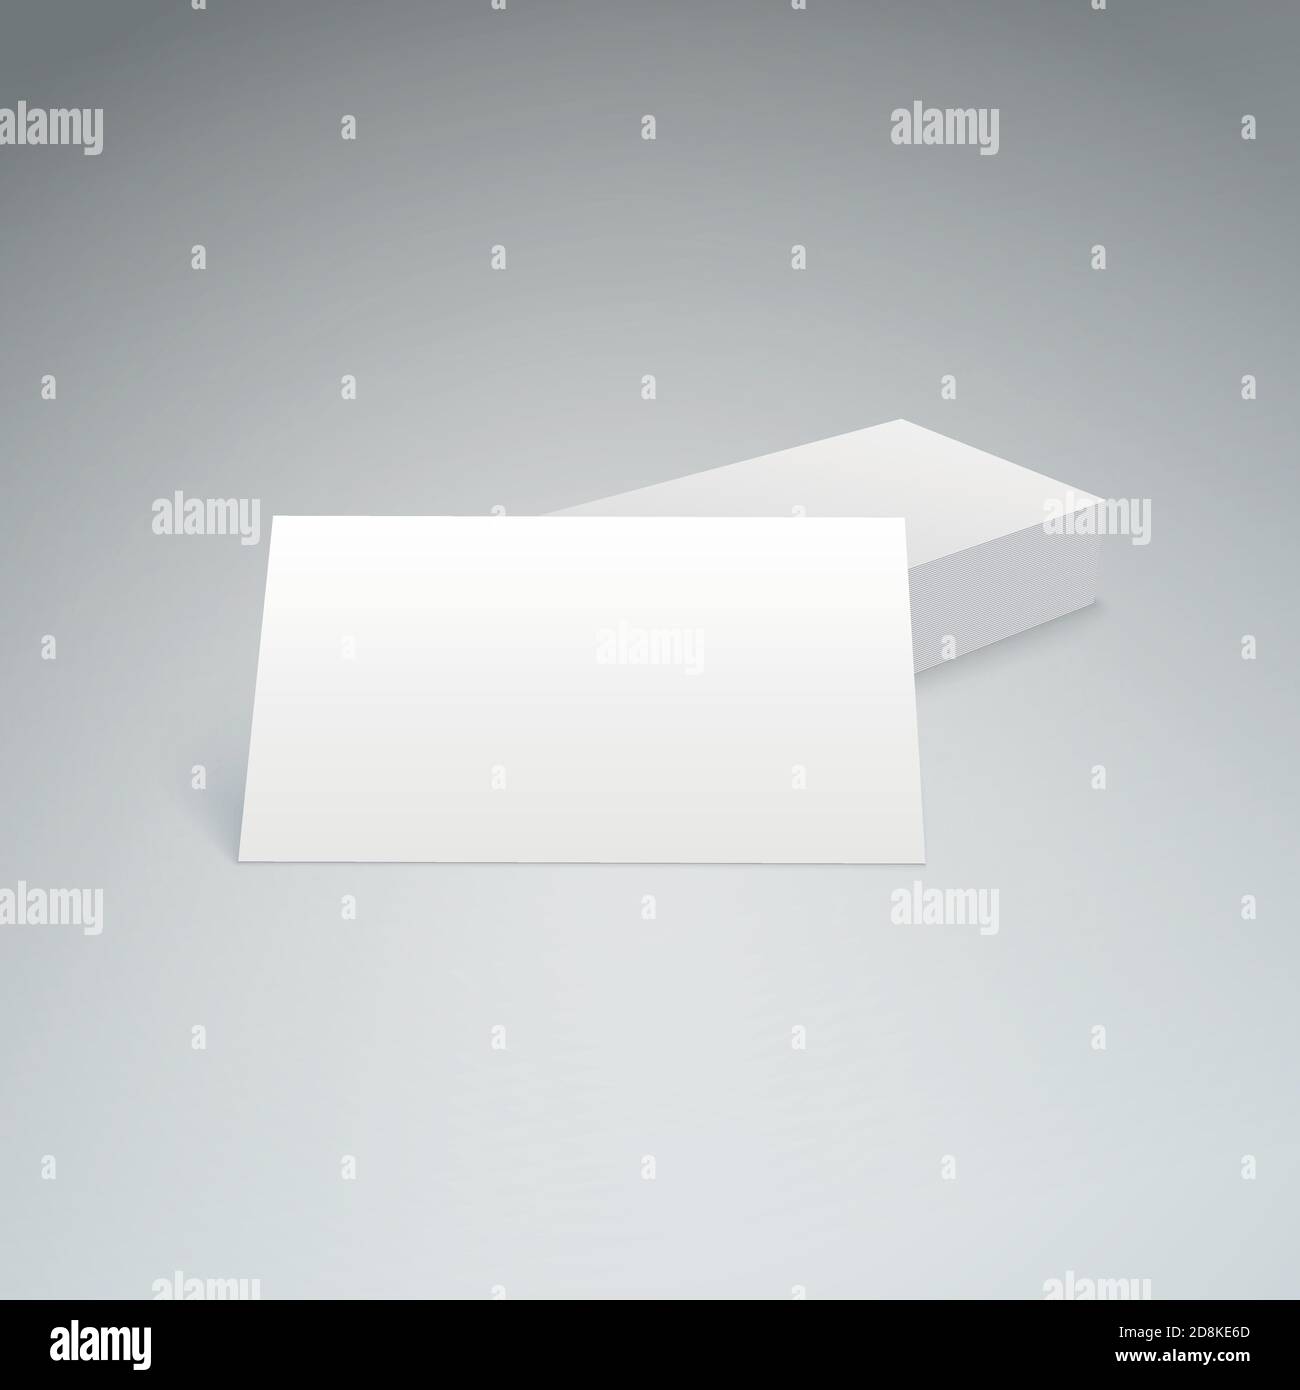 Business cards isolated with soft shadow Stock Vector